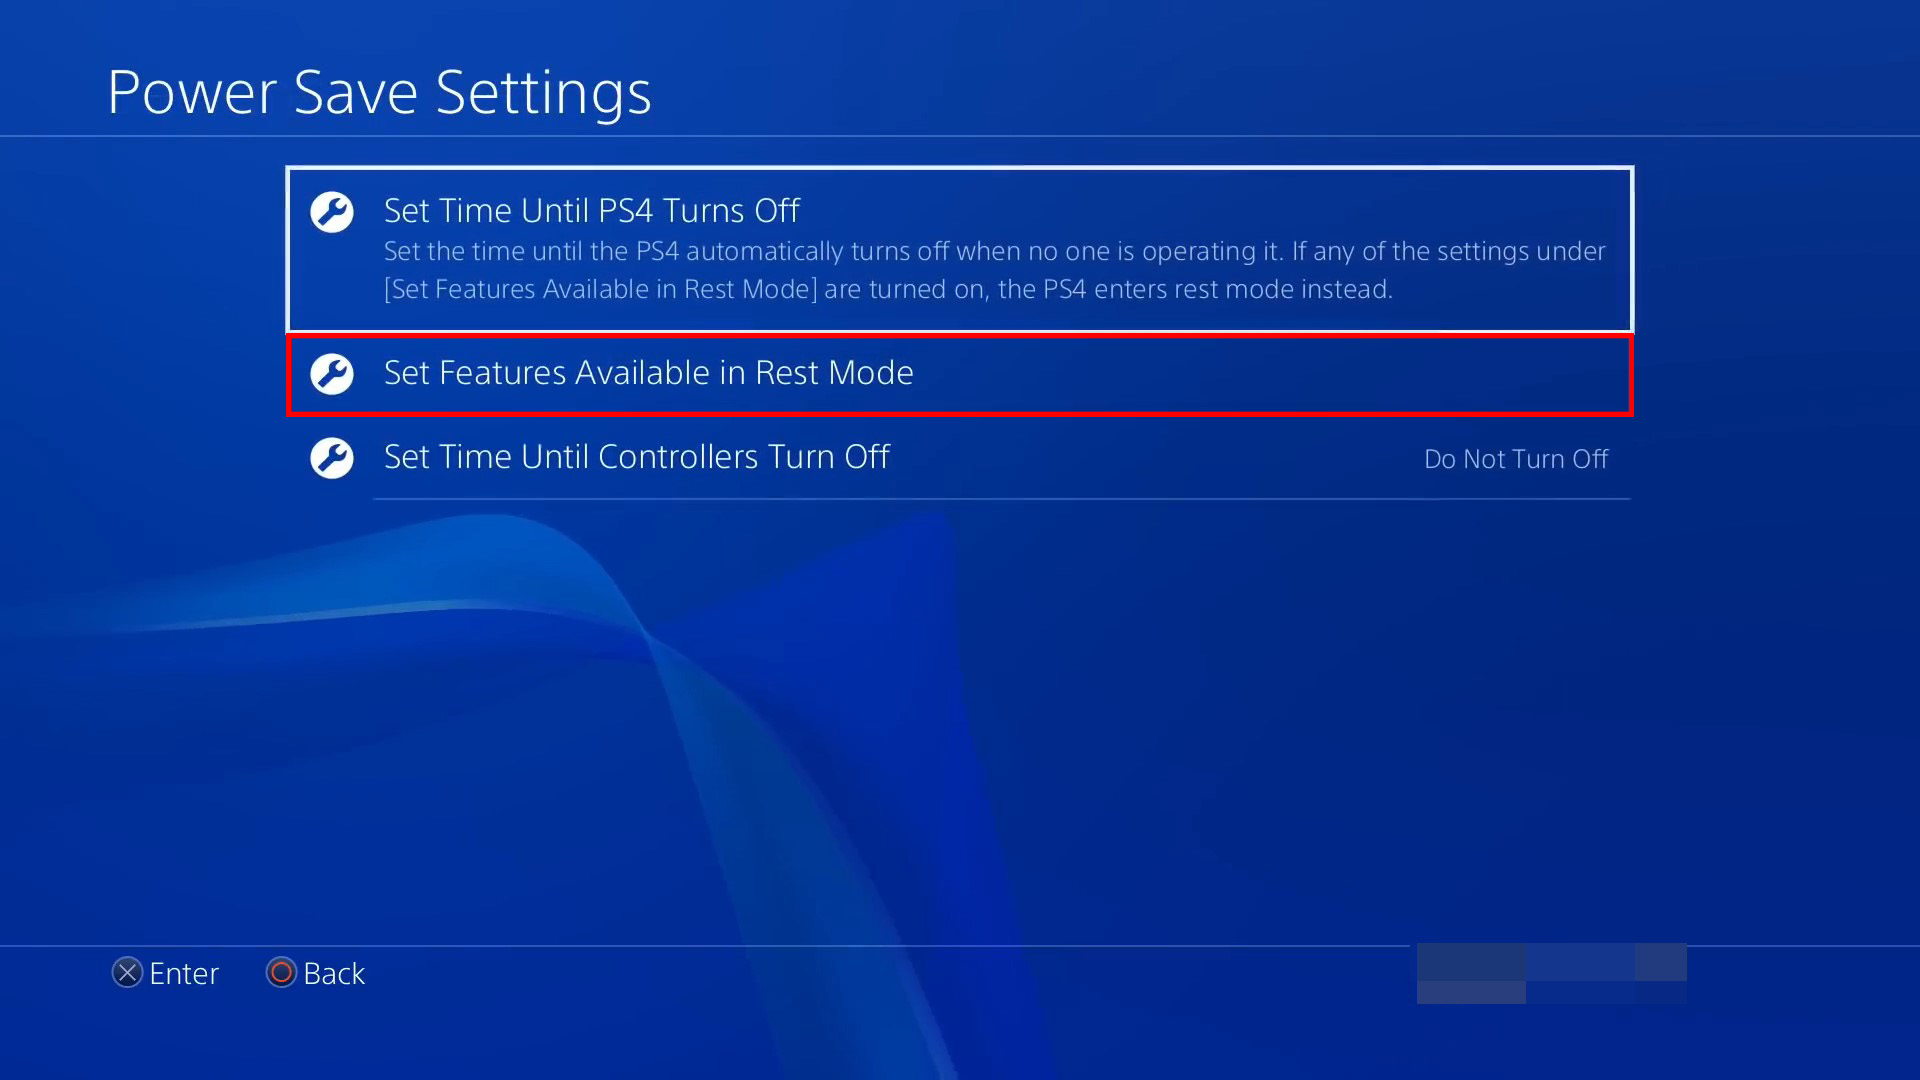 Set Features Available in Rest Mode